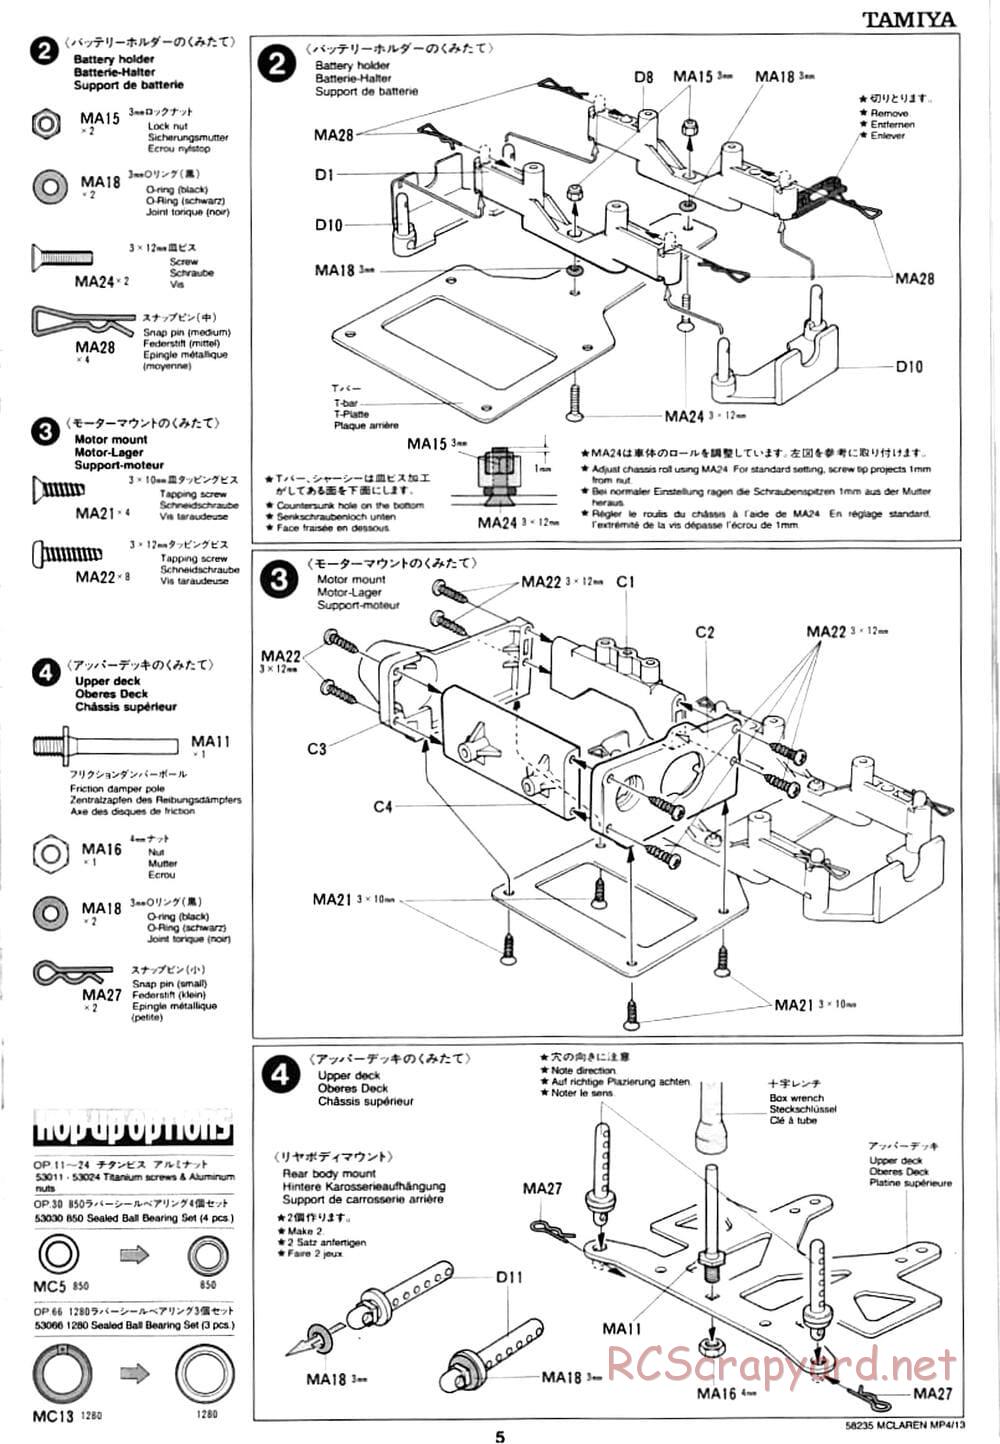 Tamiya - McLaren Mercedes MP4/13 - F103RS Chassis - Manual - Page 5